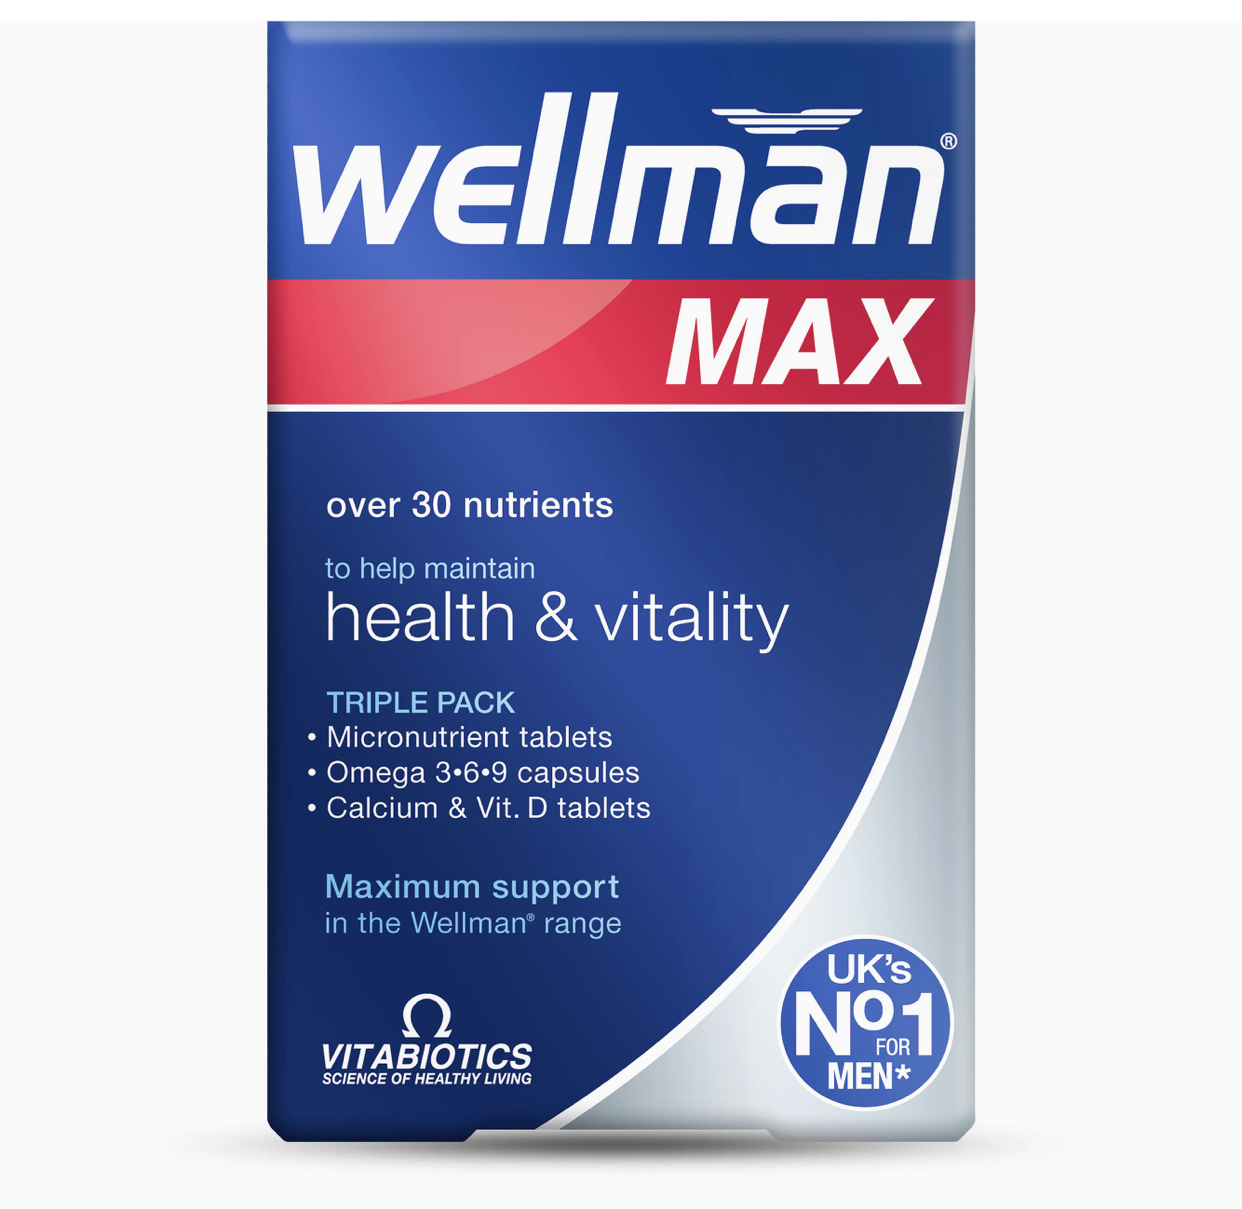 1676936297_Amazon.com20Wellman20Max20Capsules20-20Pack20of20842020Health202620Household.png